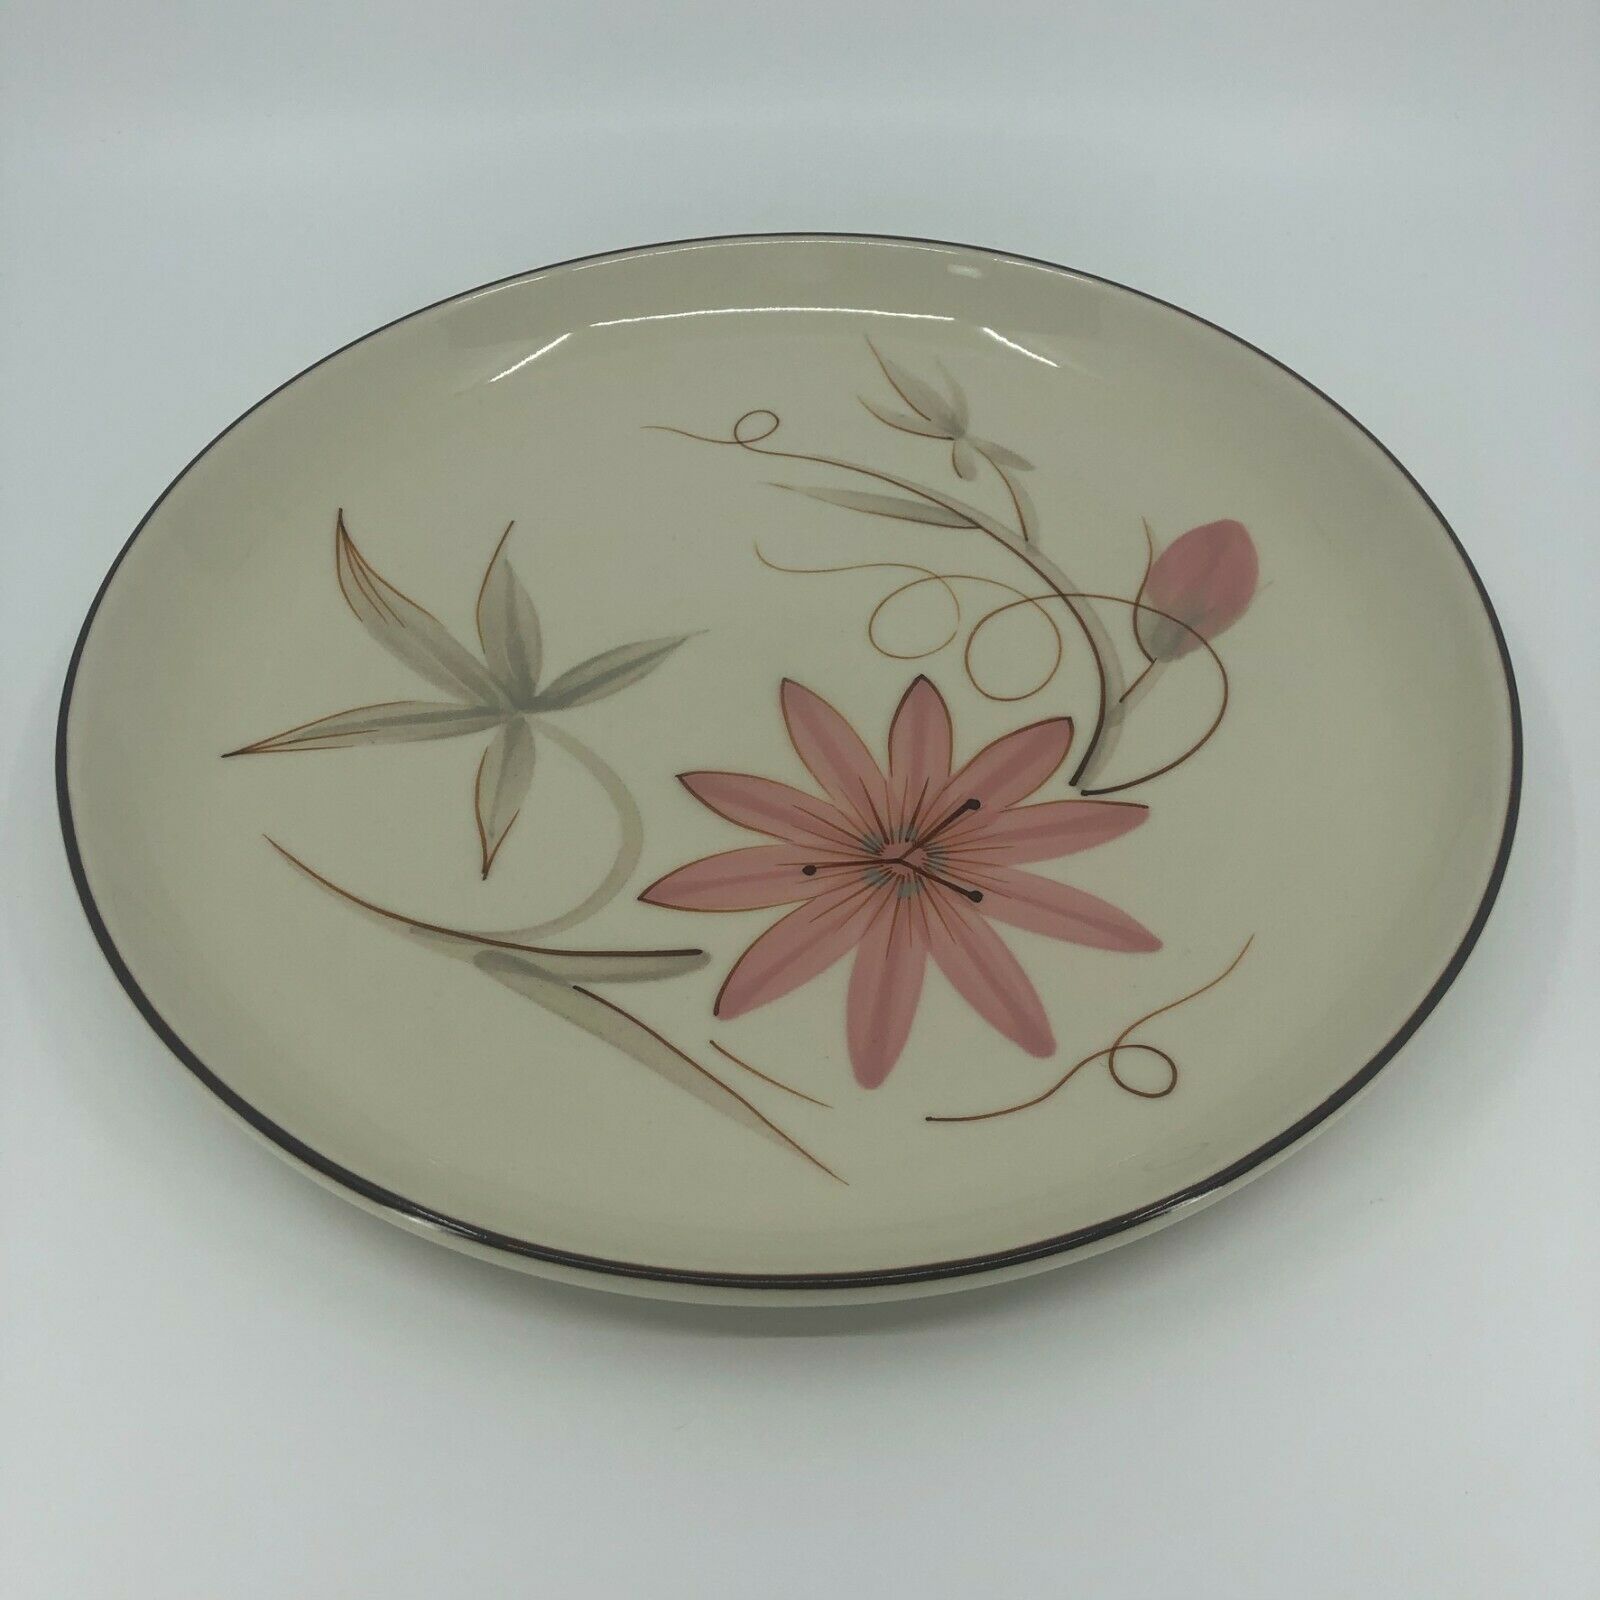 Winfield Pottery Company Dinner Plate In Passion Flower Pattern